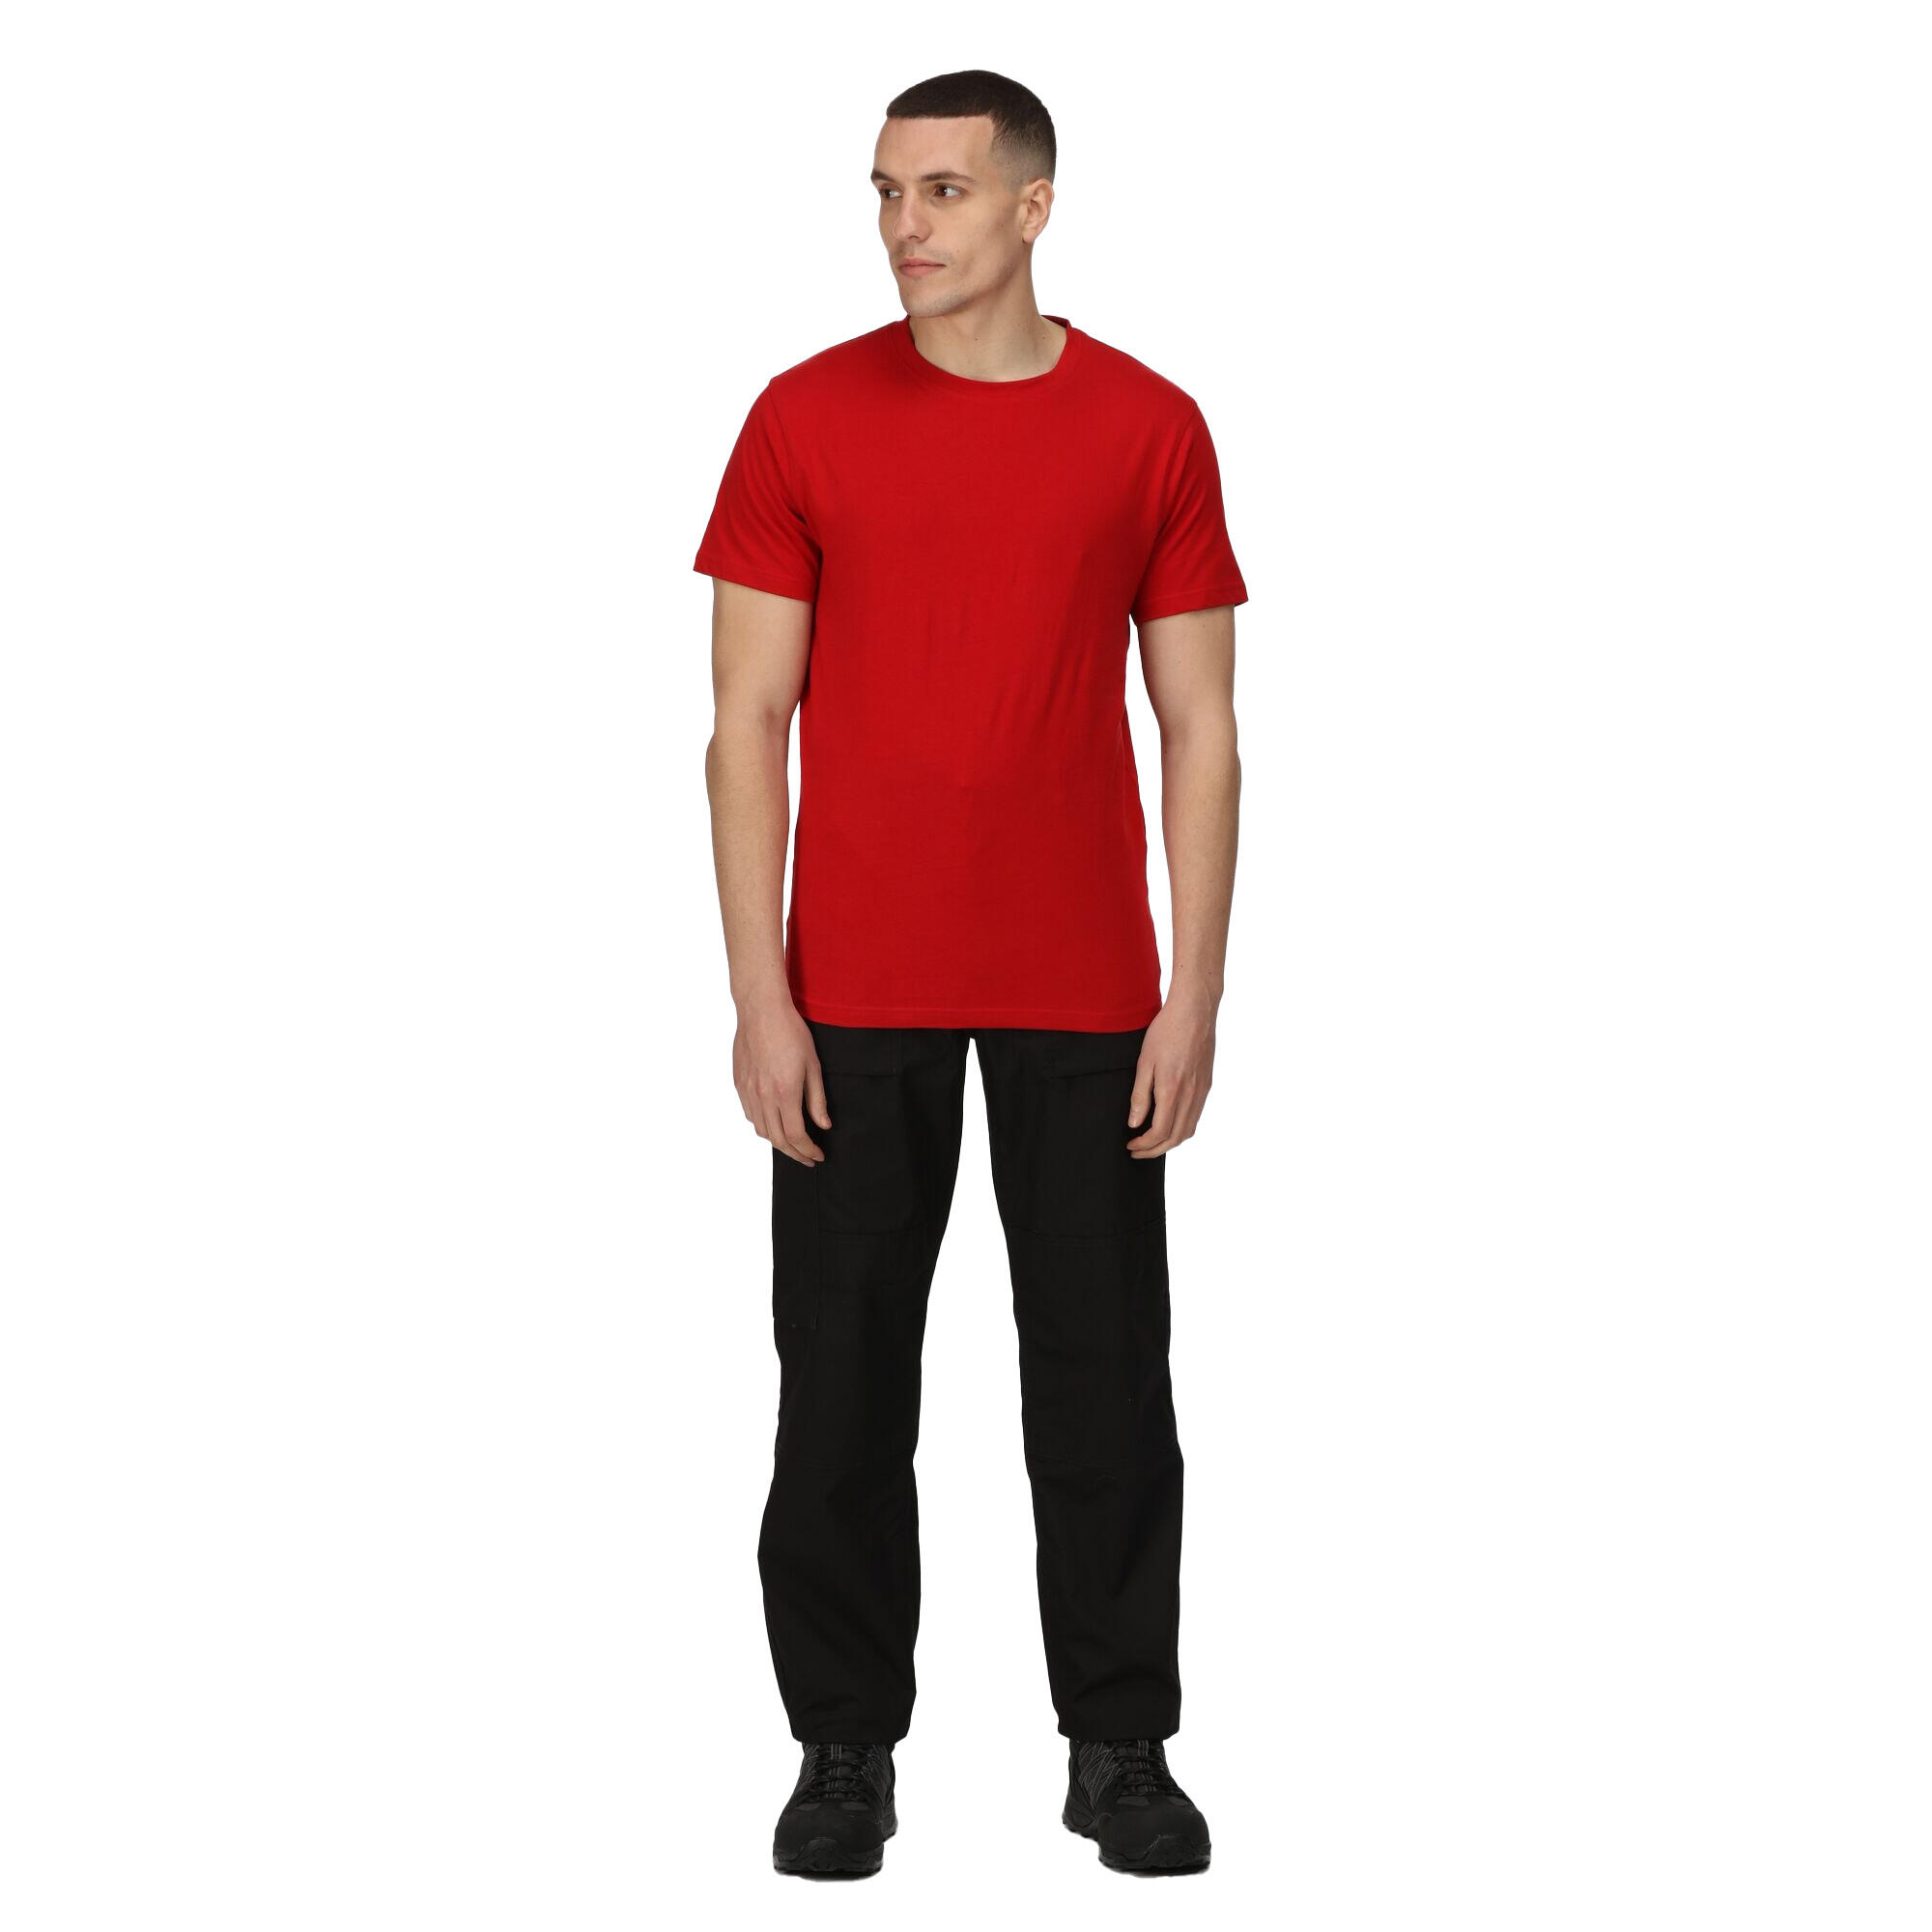 Mens Pro Cotton Soft Touch TShirt (Classic Red) 4/5